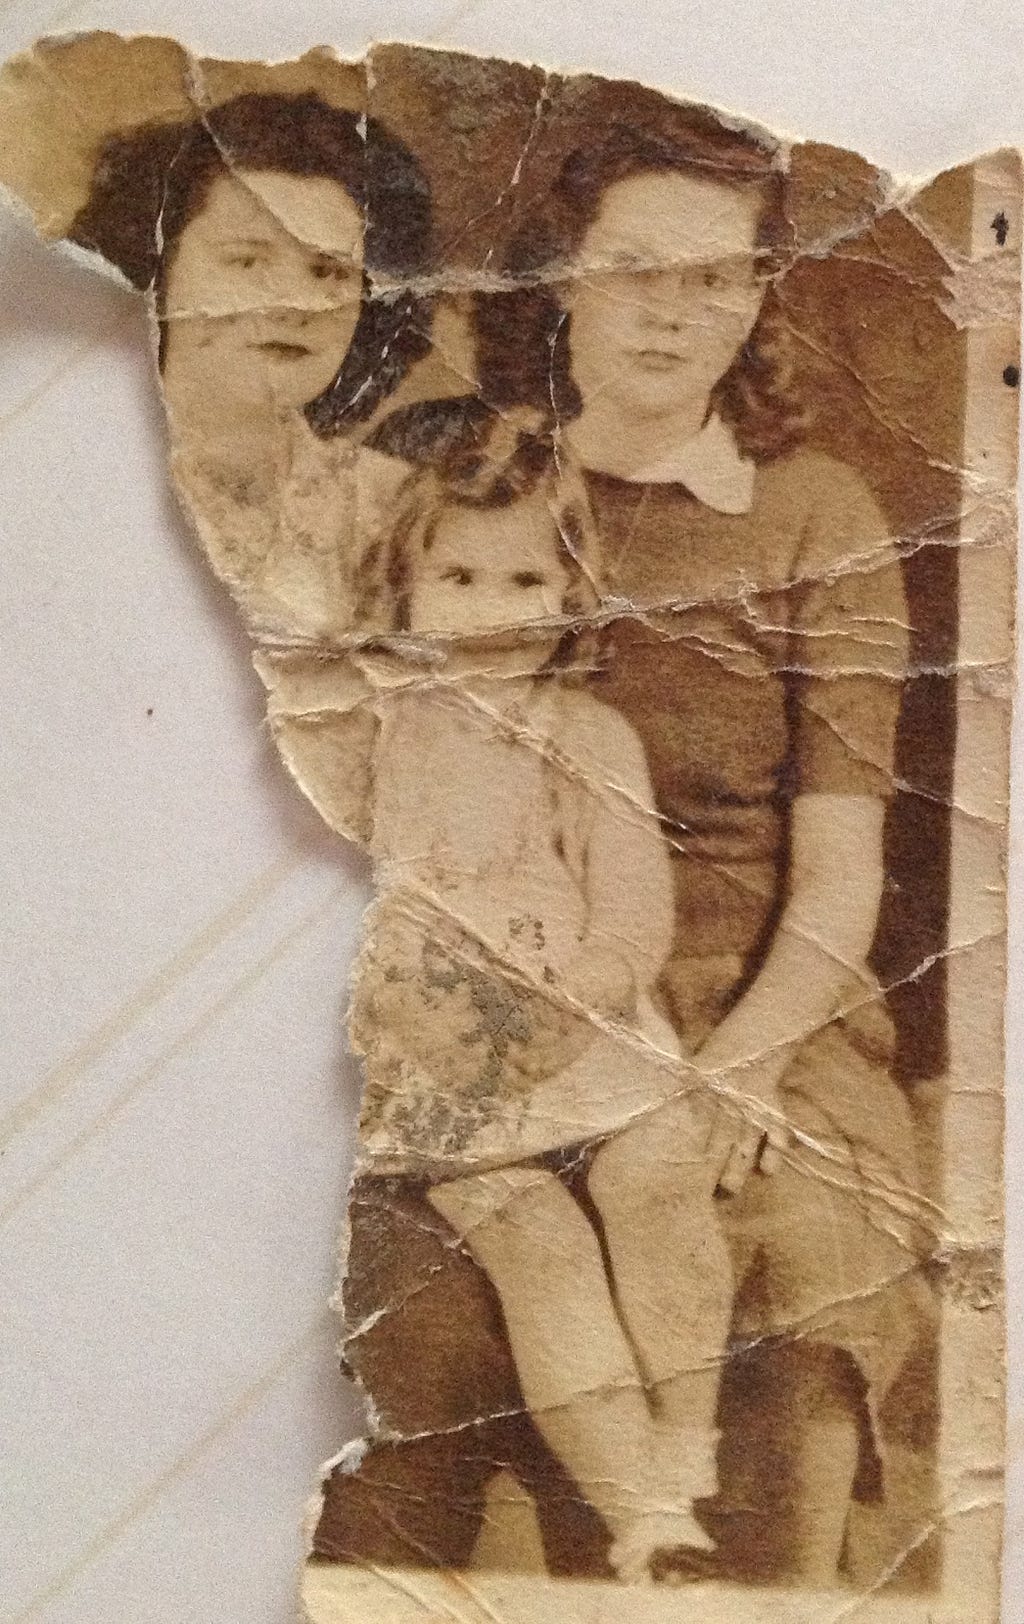 A torn, old family photograph